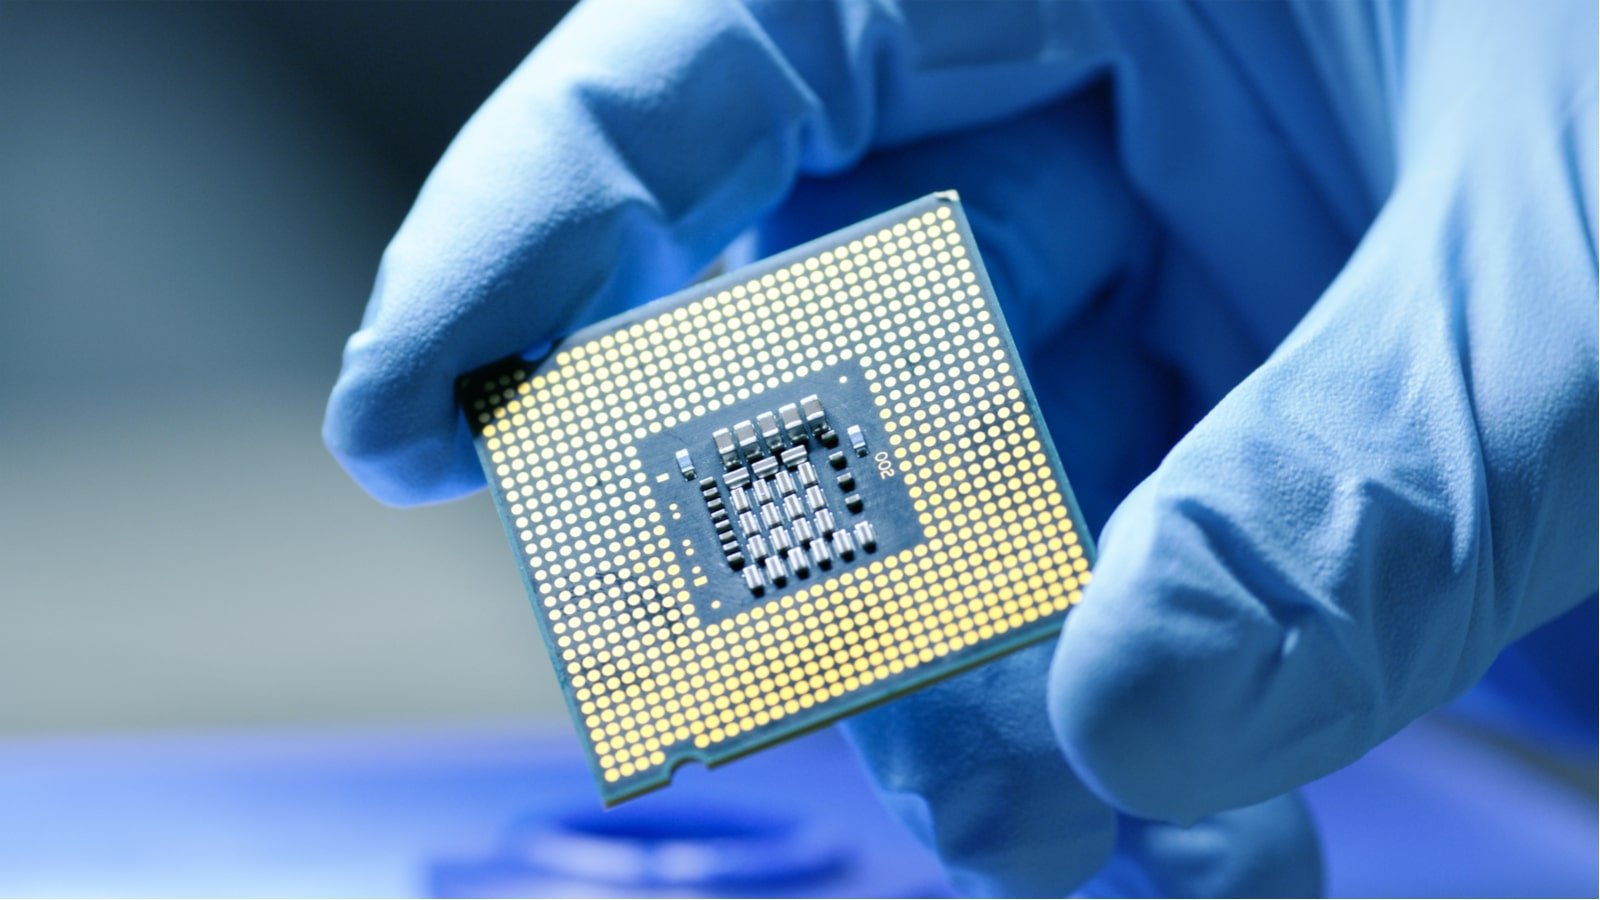 7 Semiconductor Stock Predictions for 2023